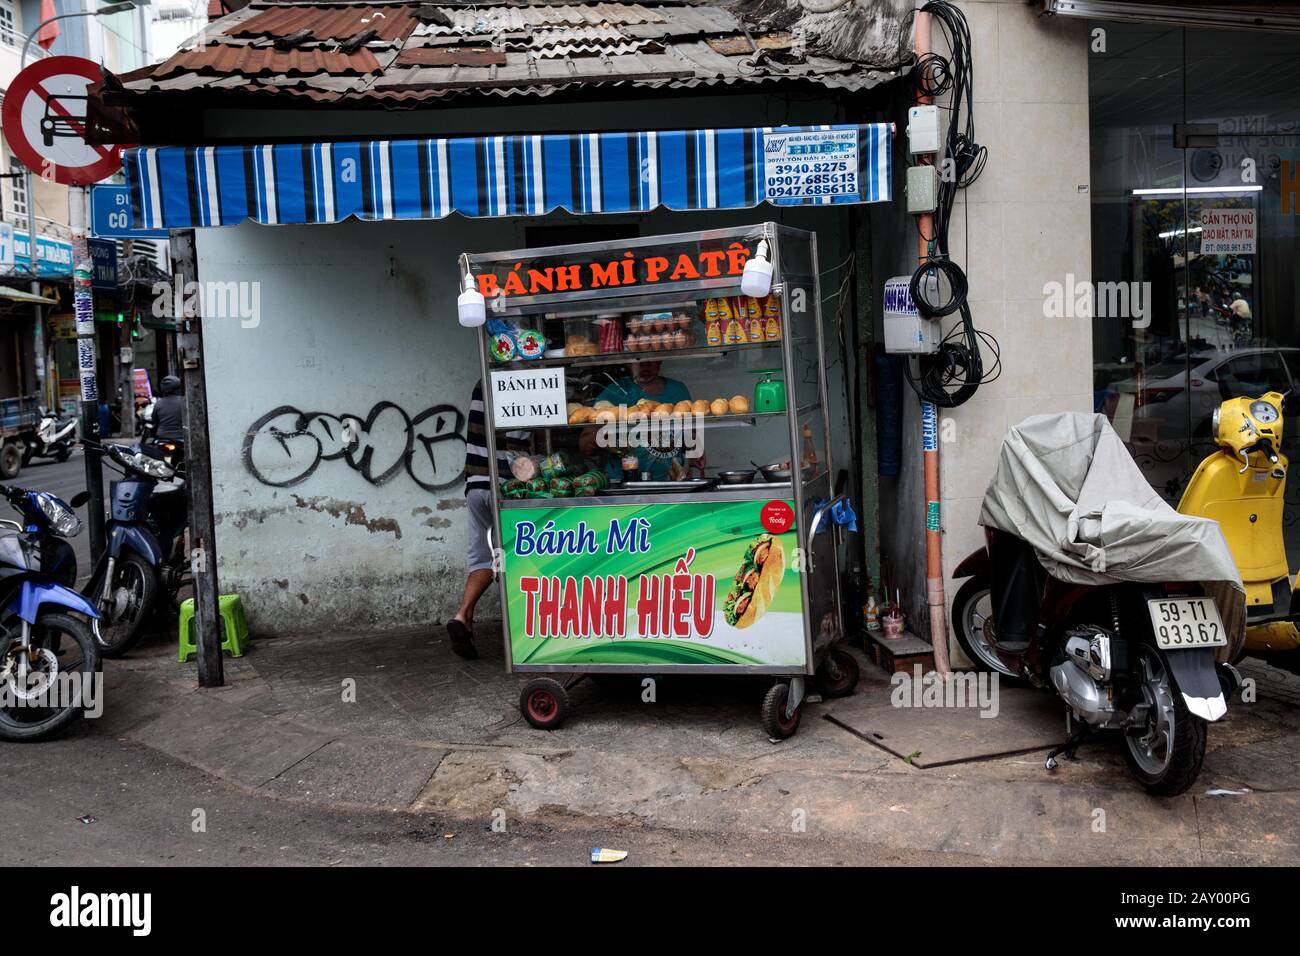 XXXXX in Ho Chi Minh City, Vietnam on October 23rd, 2019. (Photo ...